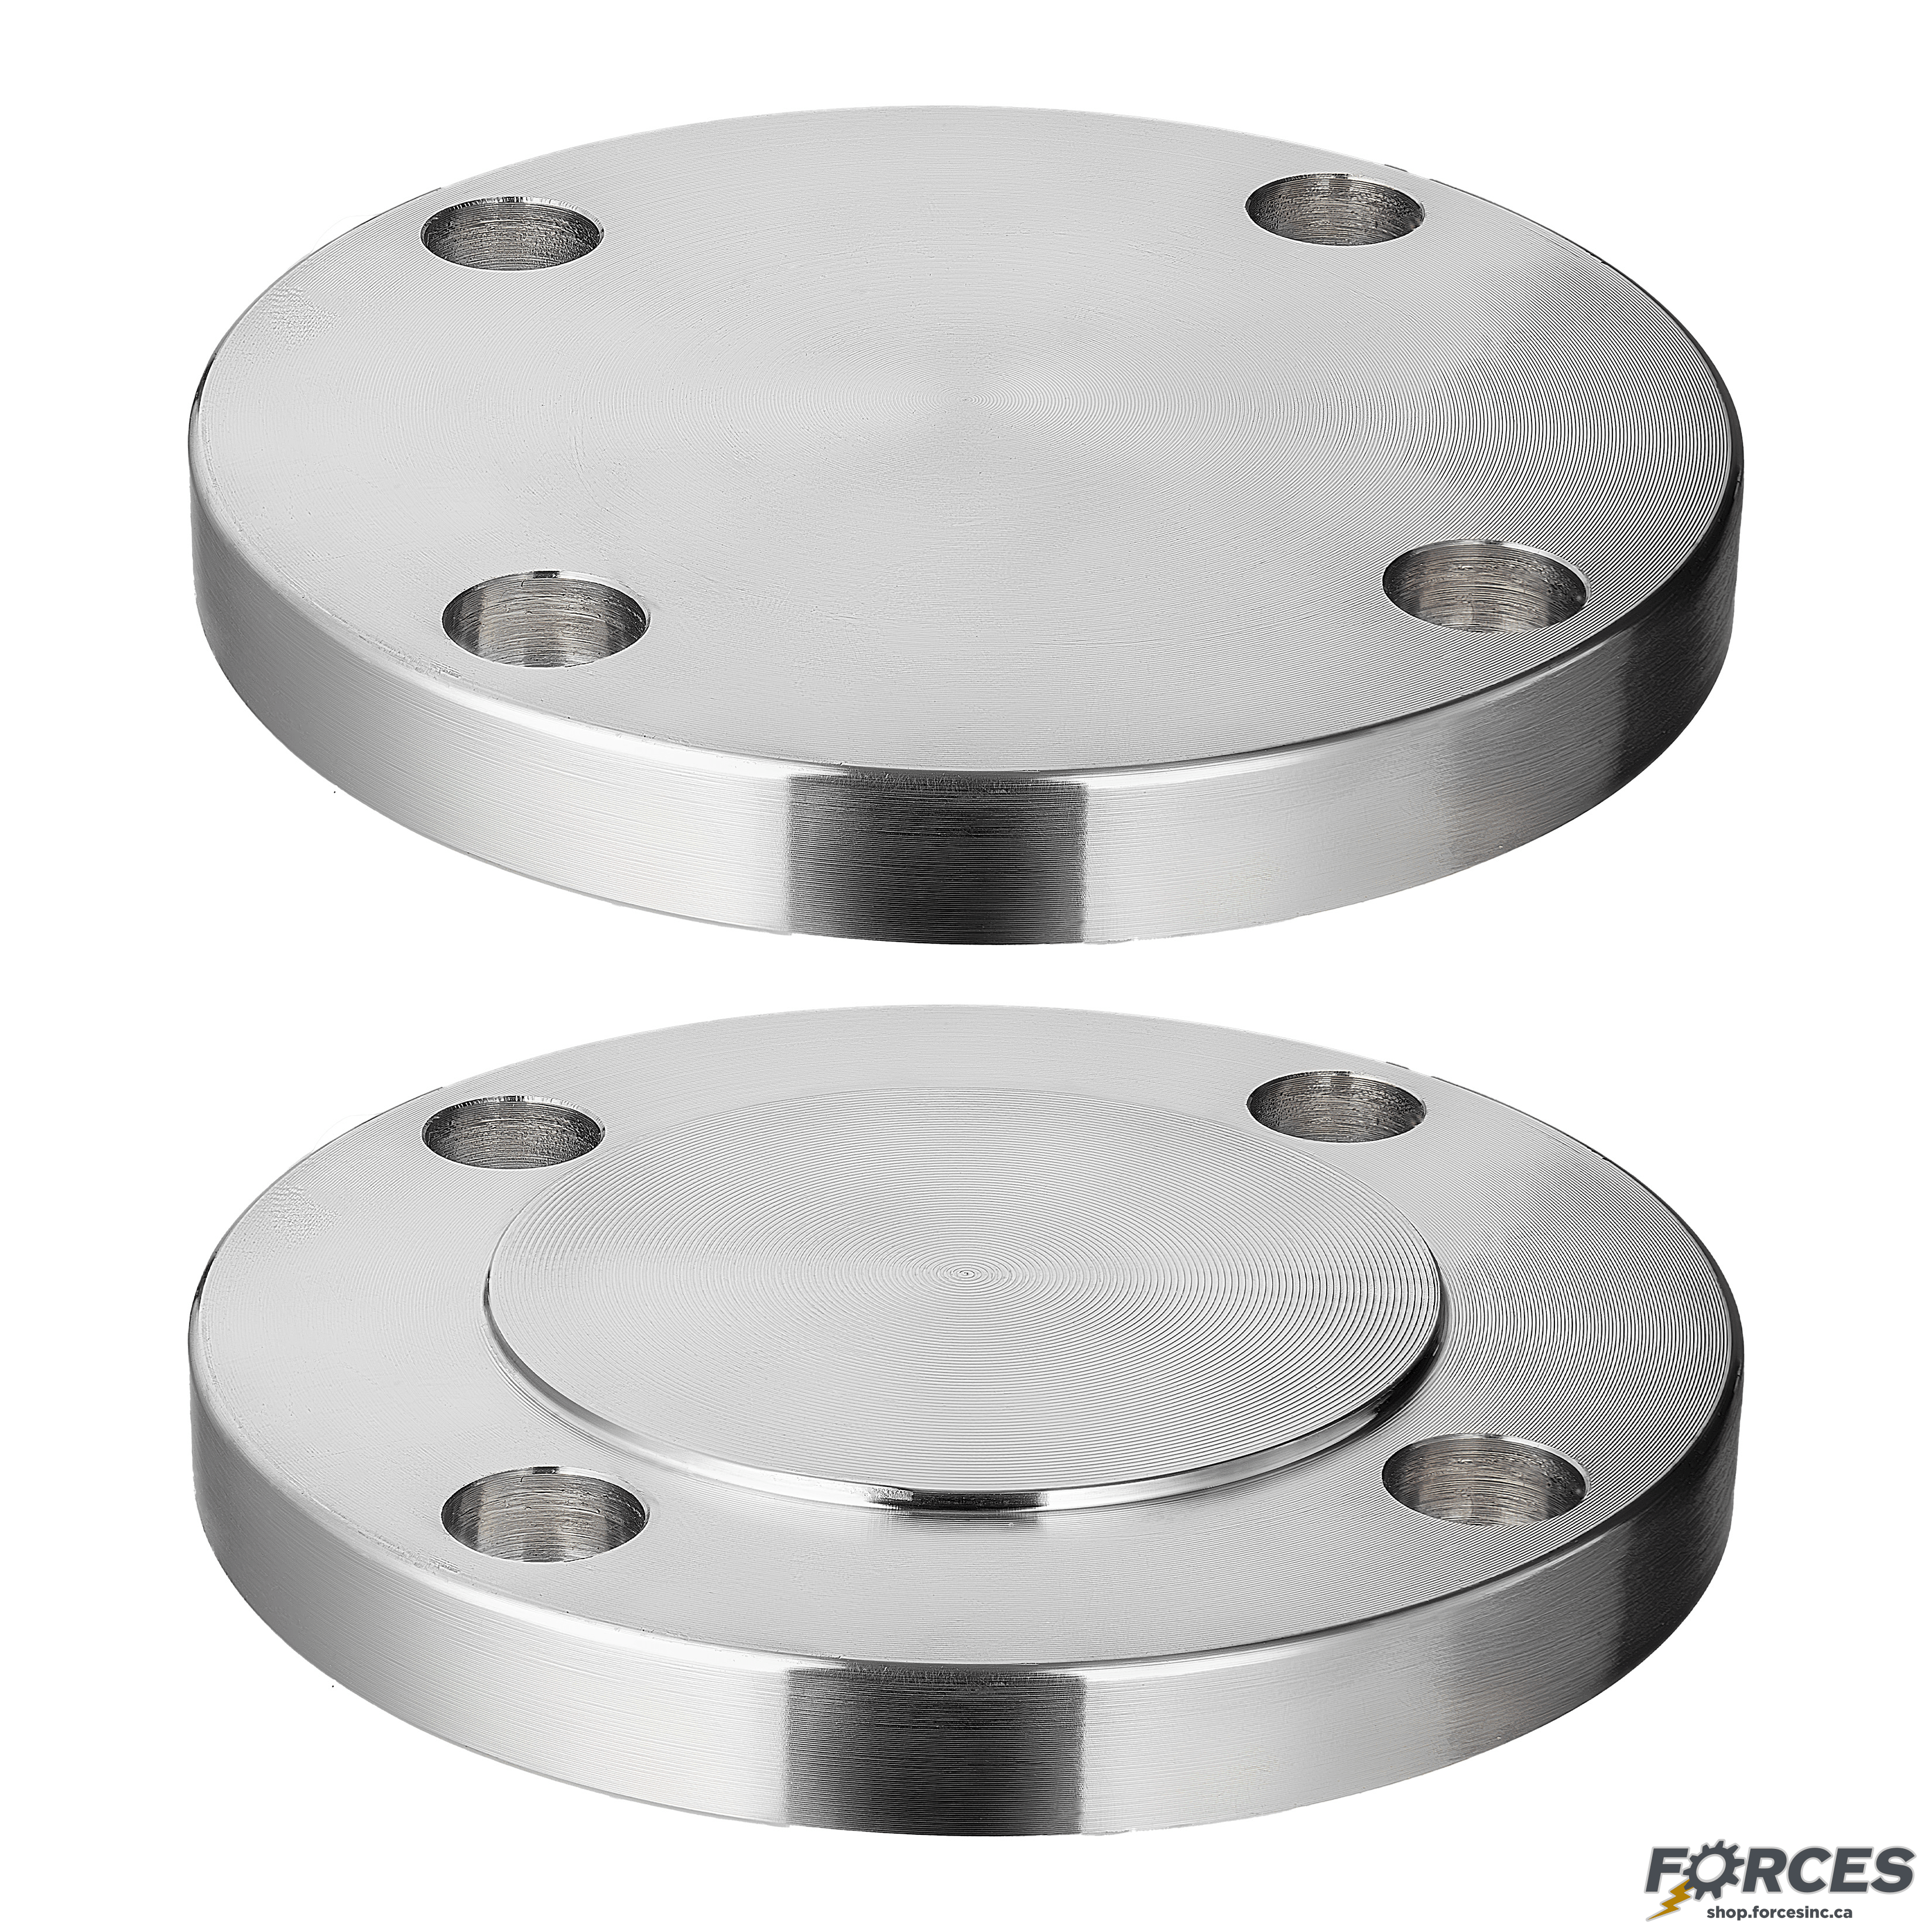 3/4" Blind Flange Class #150 - Stainless Steel 316 - Forces Inc